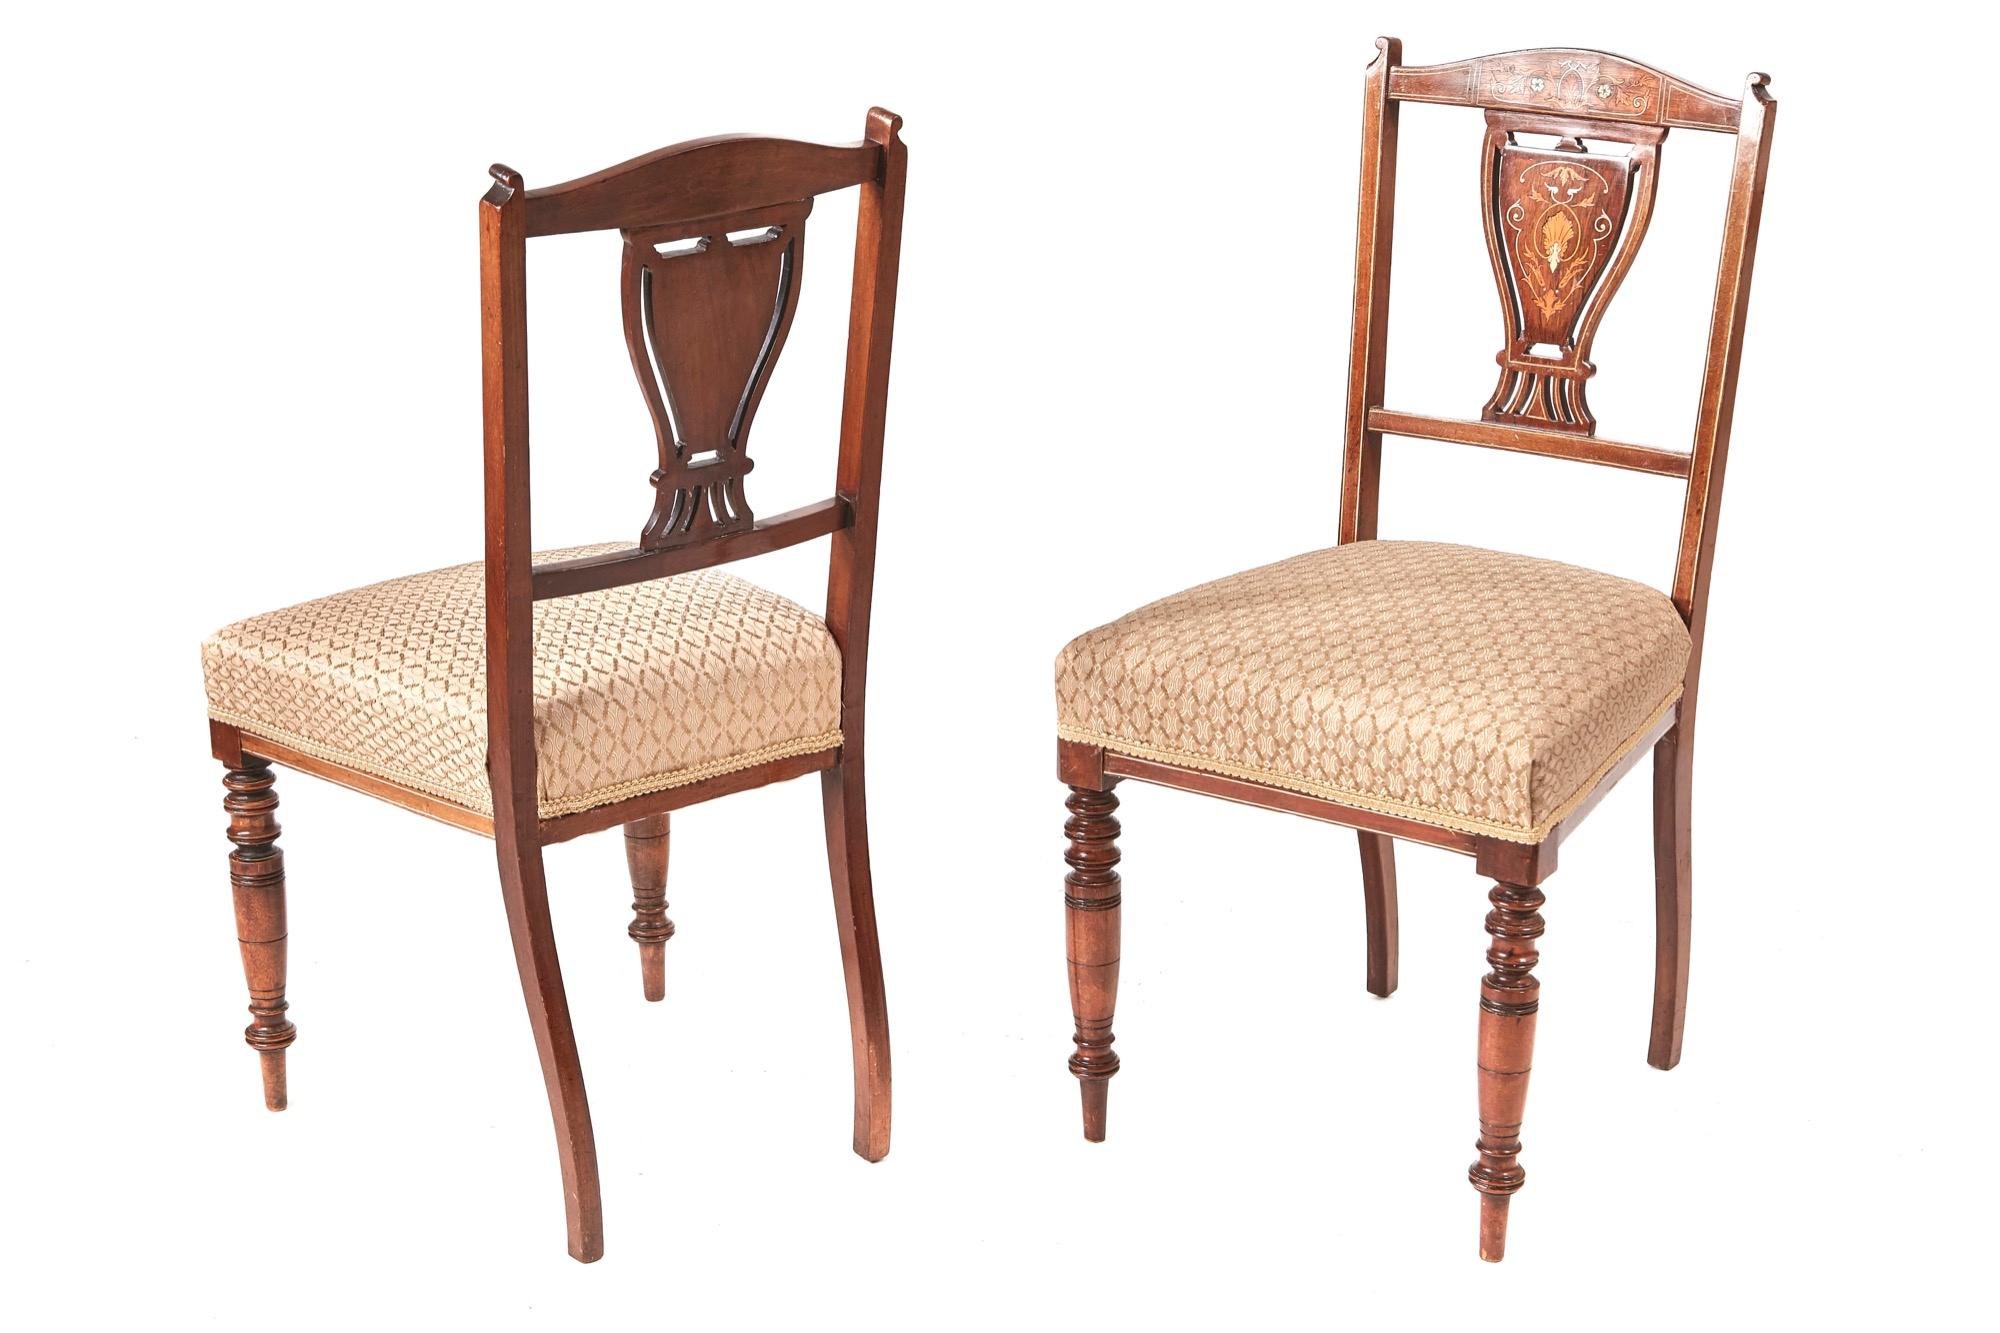 Set of four Edwardian rosewood inlaid dining chairs, having a lovely inlaid shaped top, inlaid shaped splat, standing on turned legs to the front outswept back legs, newly recovered seats
Lovely color and condition
Measures: 18